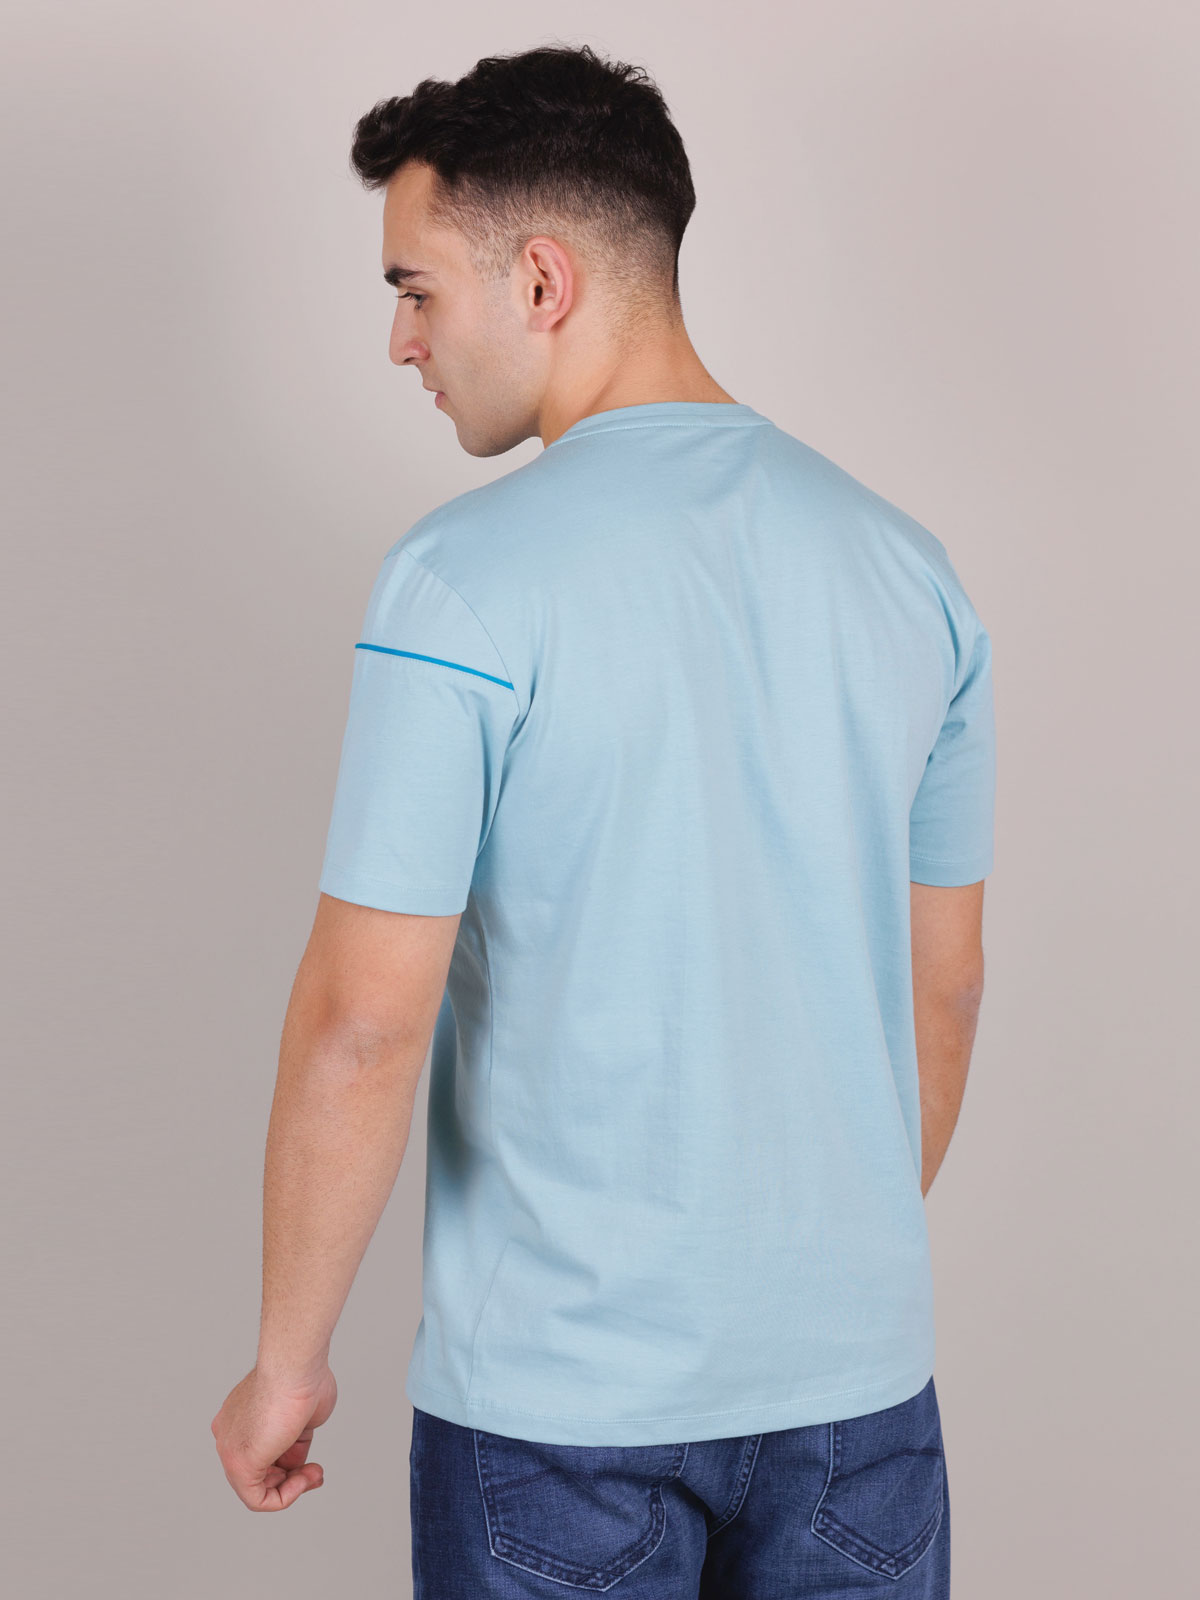 Tshirt in light blue with logo - 96454 € 21.93 img2